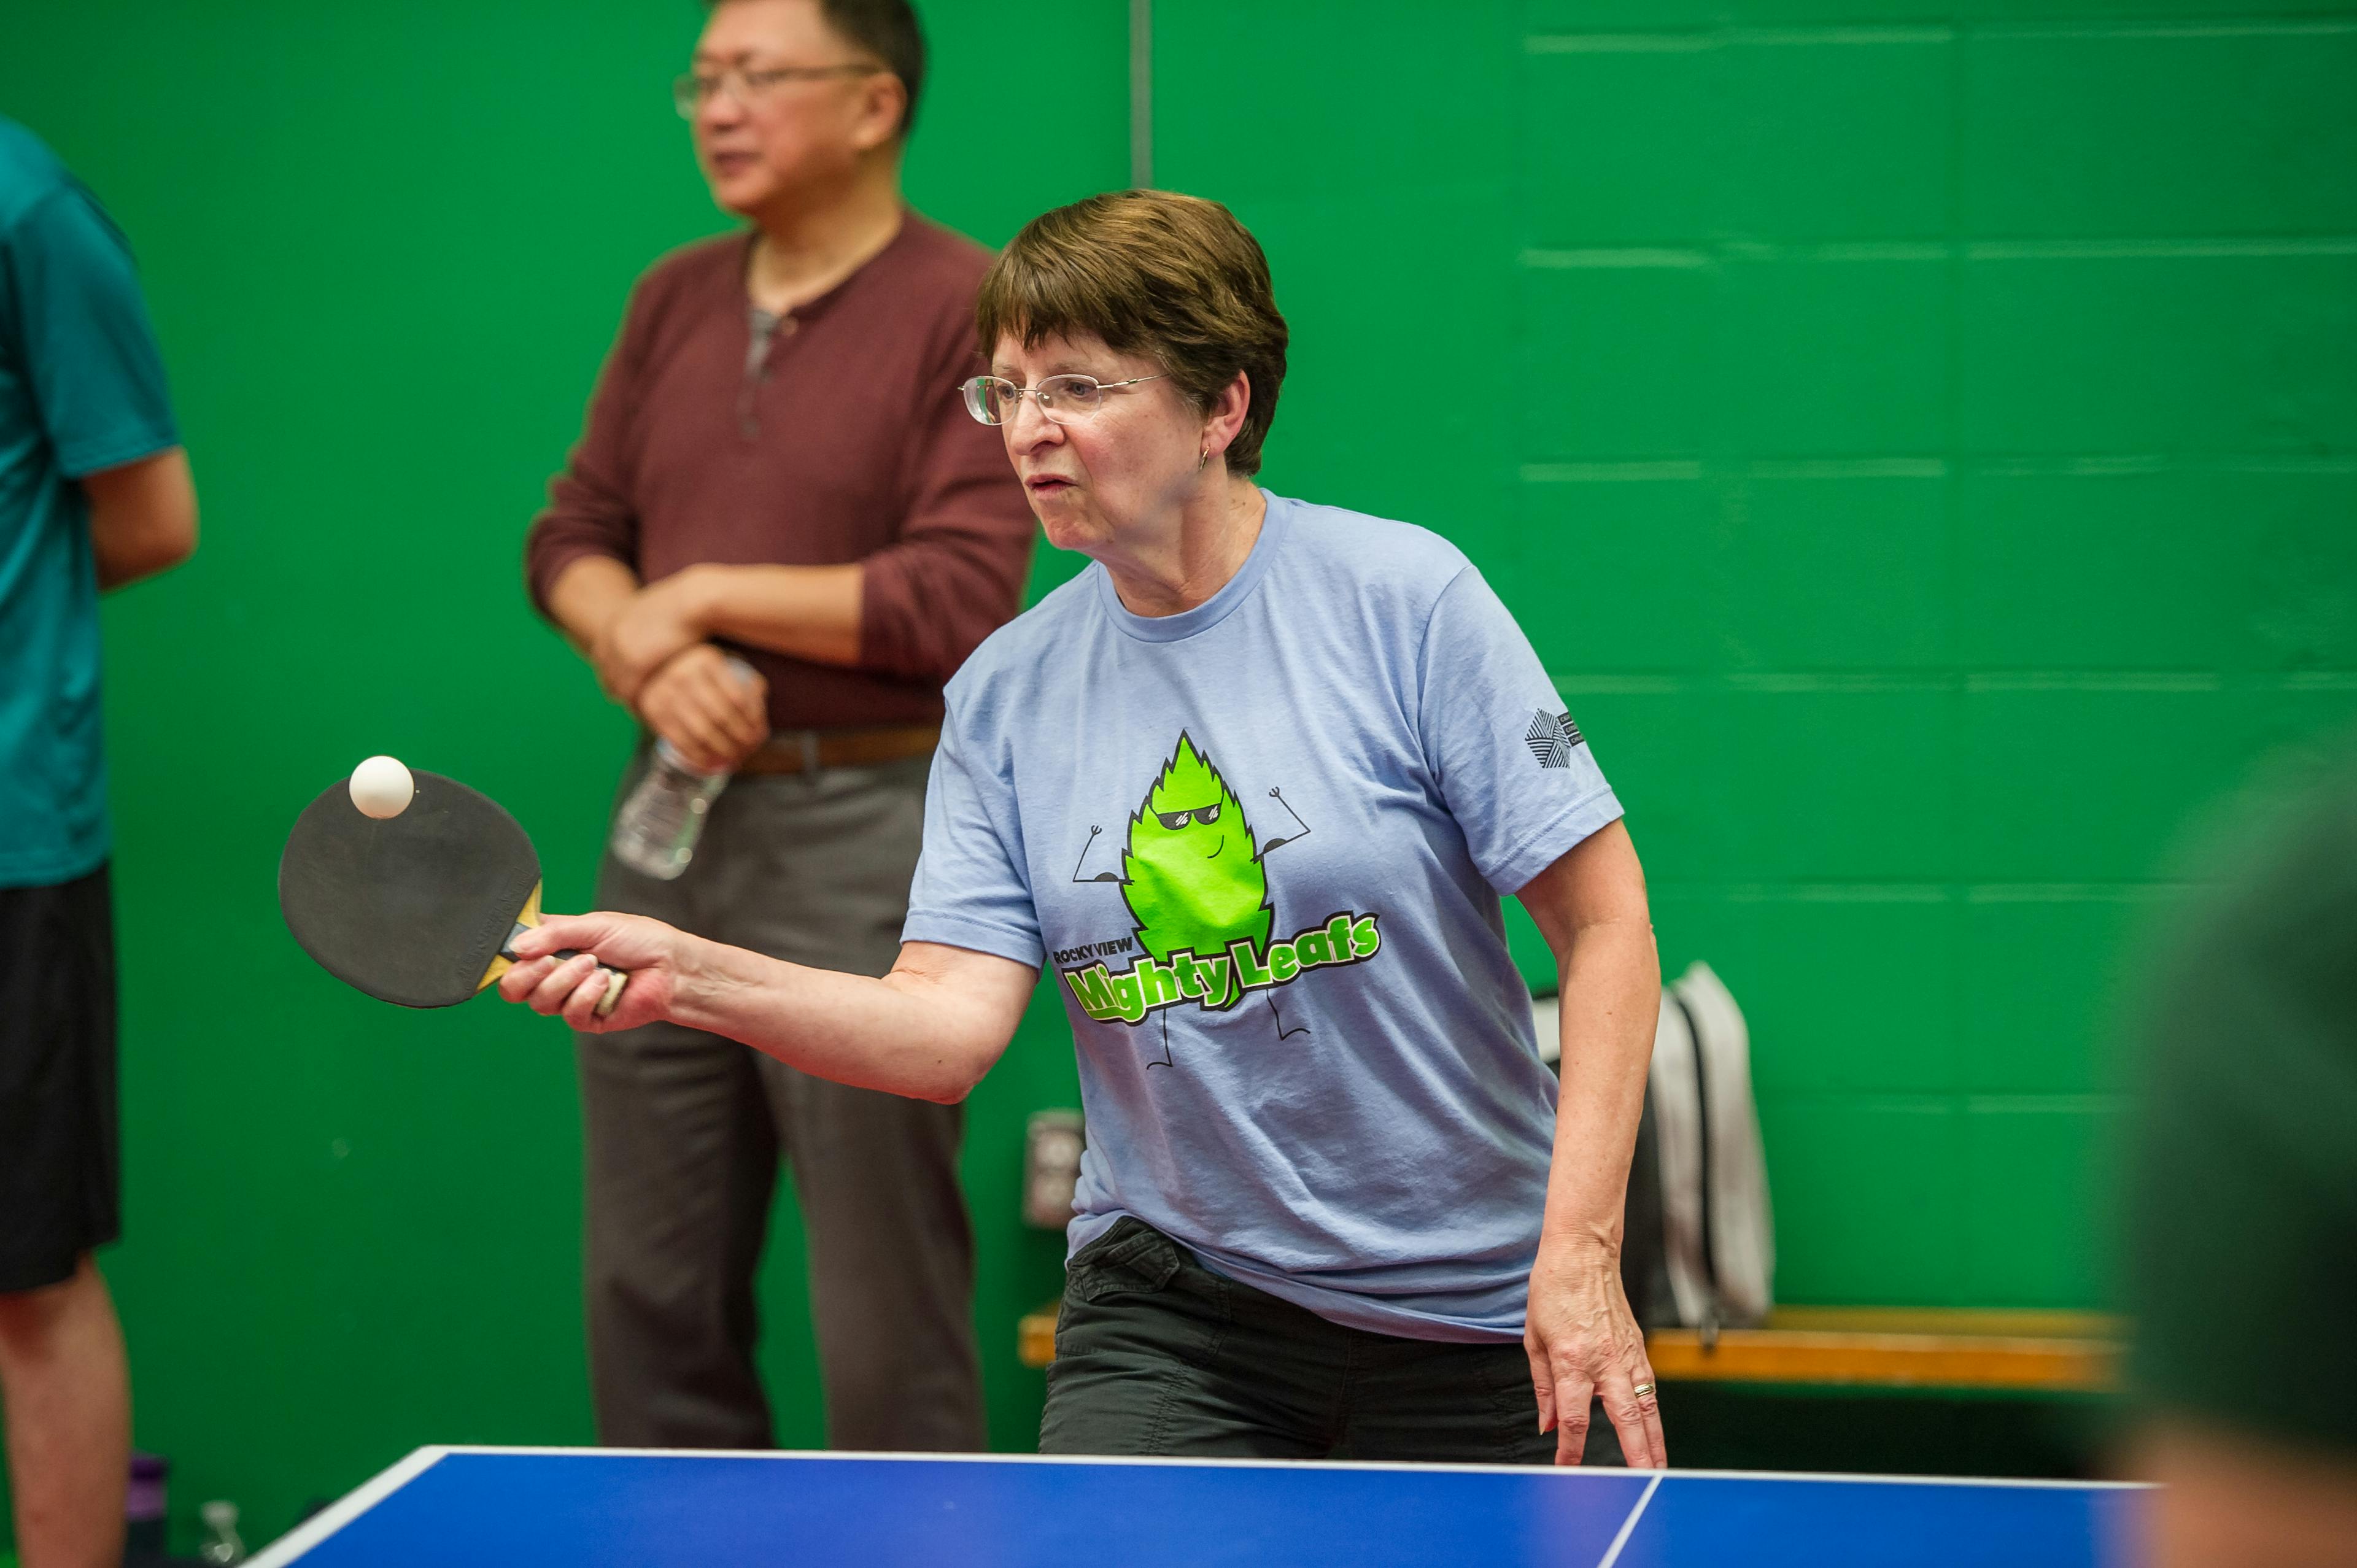 woman playing table tennis